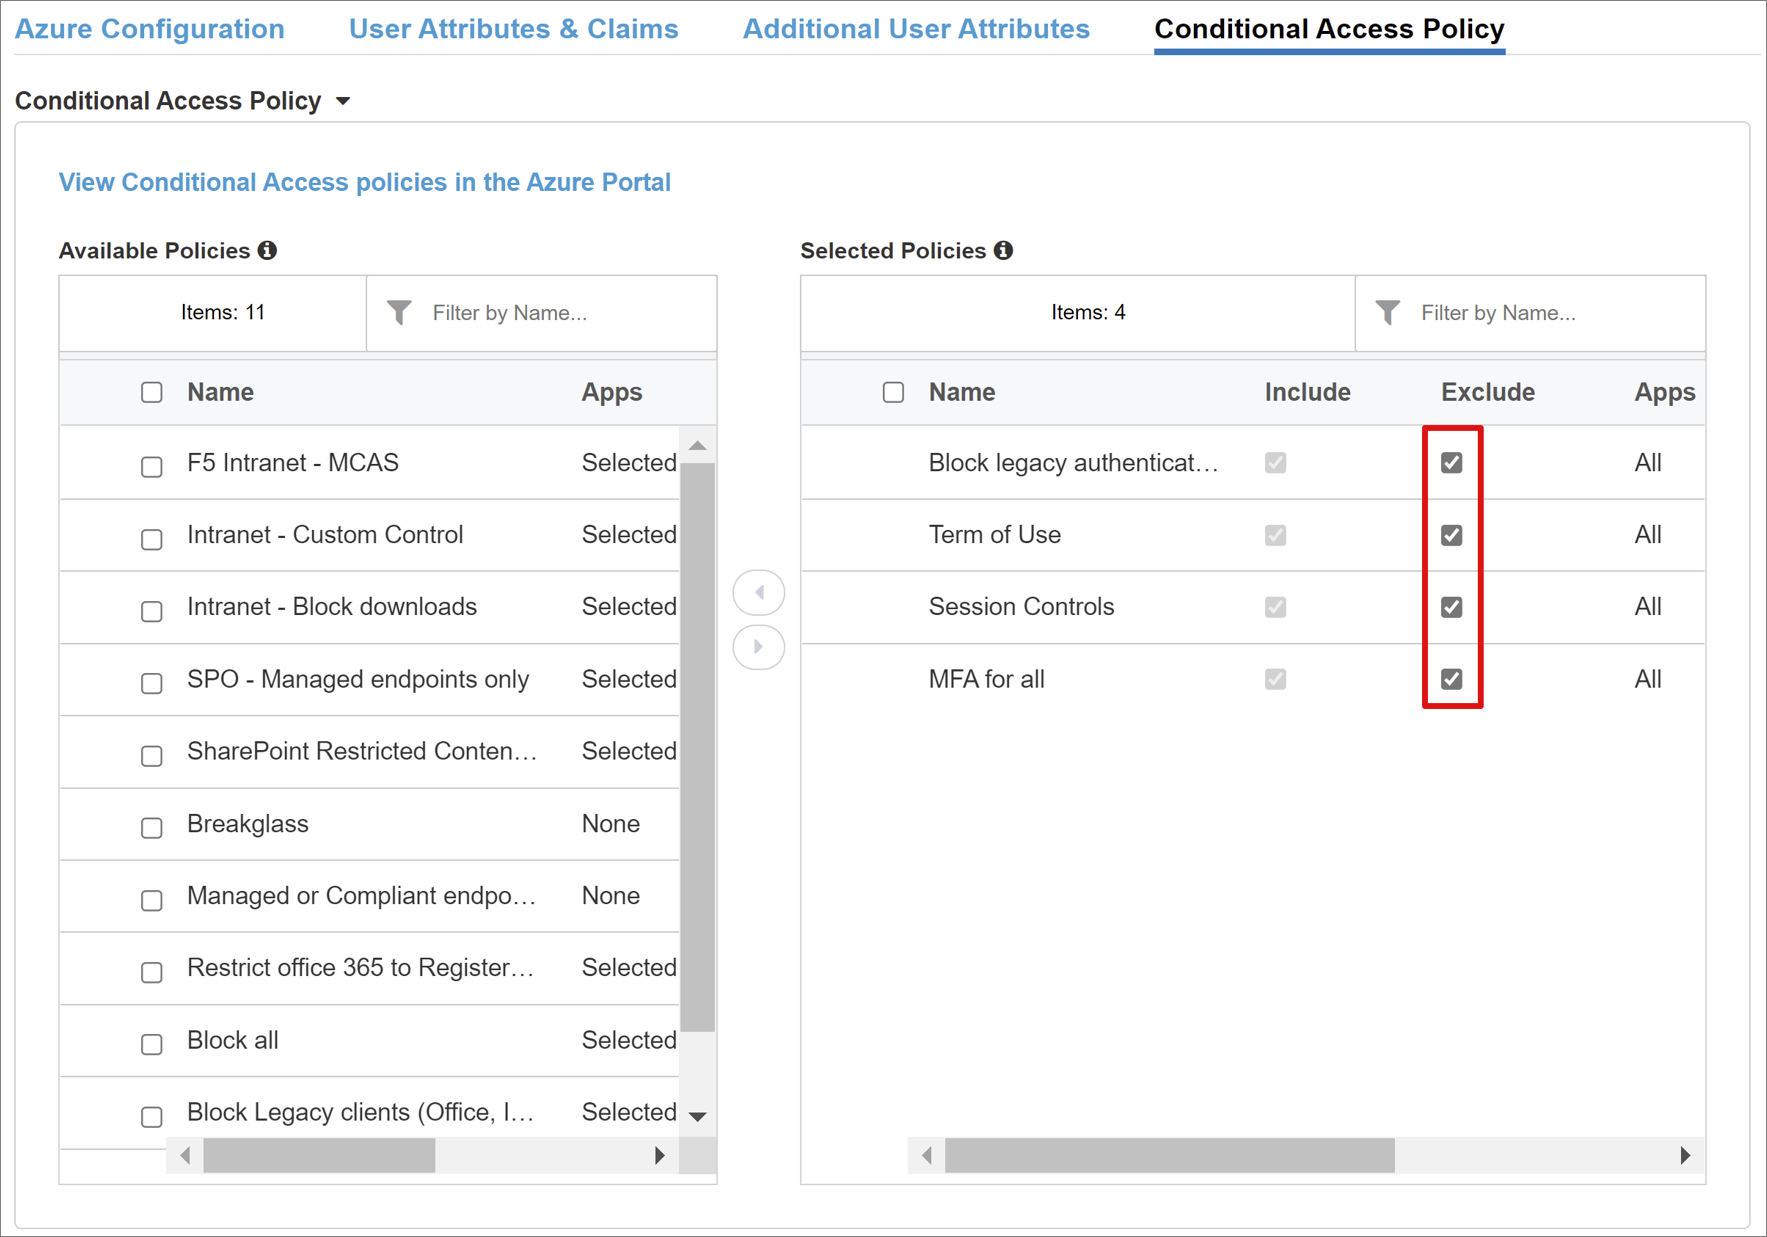 Screenshot of excluded Conditional Access policies, under Selected Policies, on Conditional Access Policy.